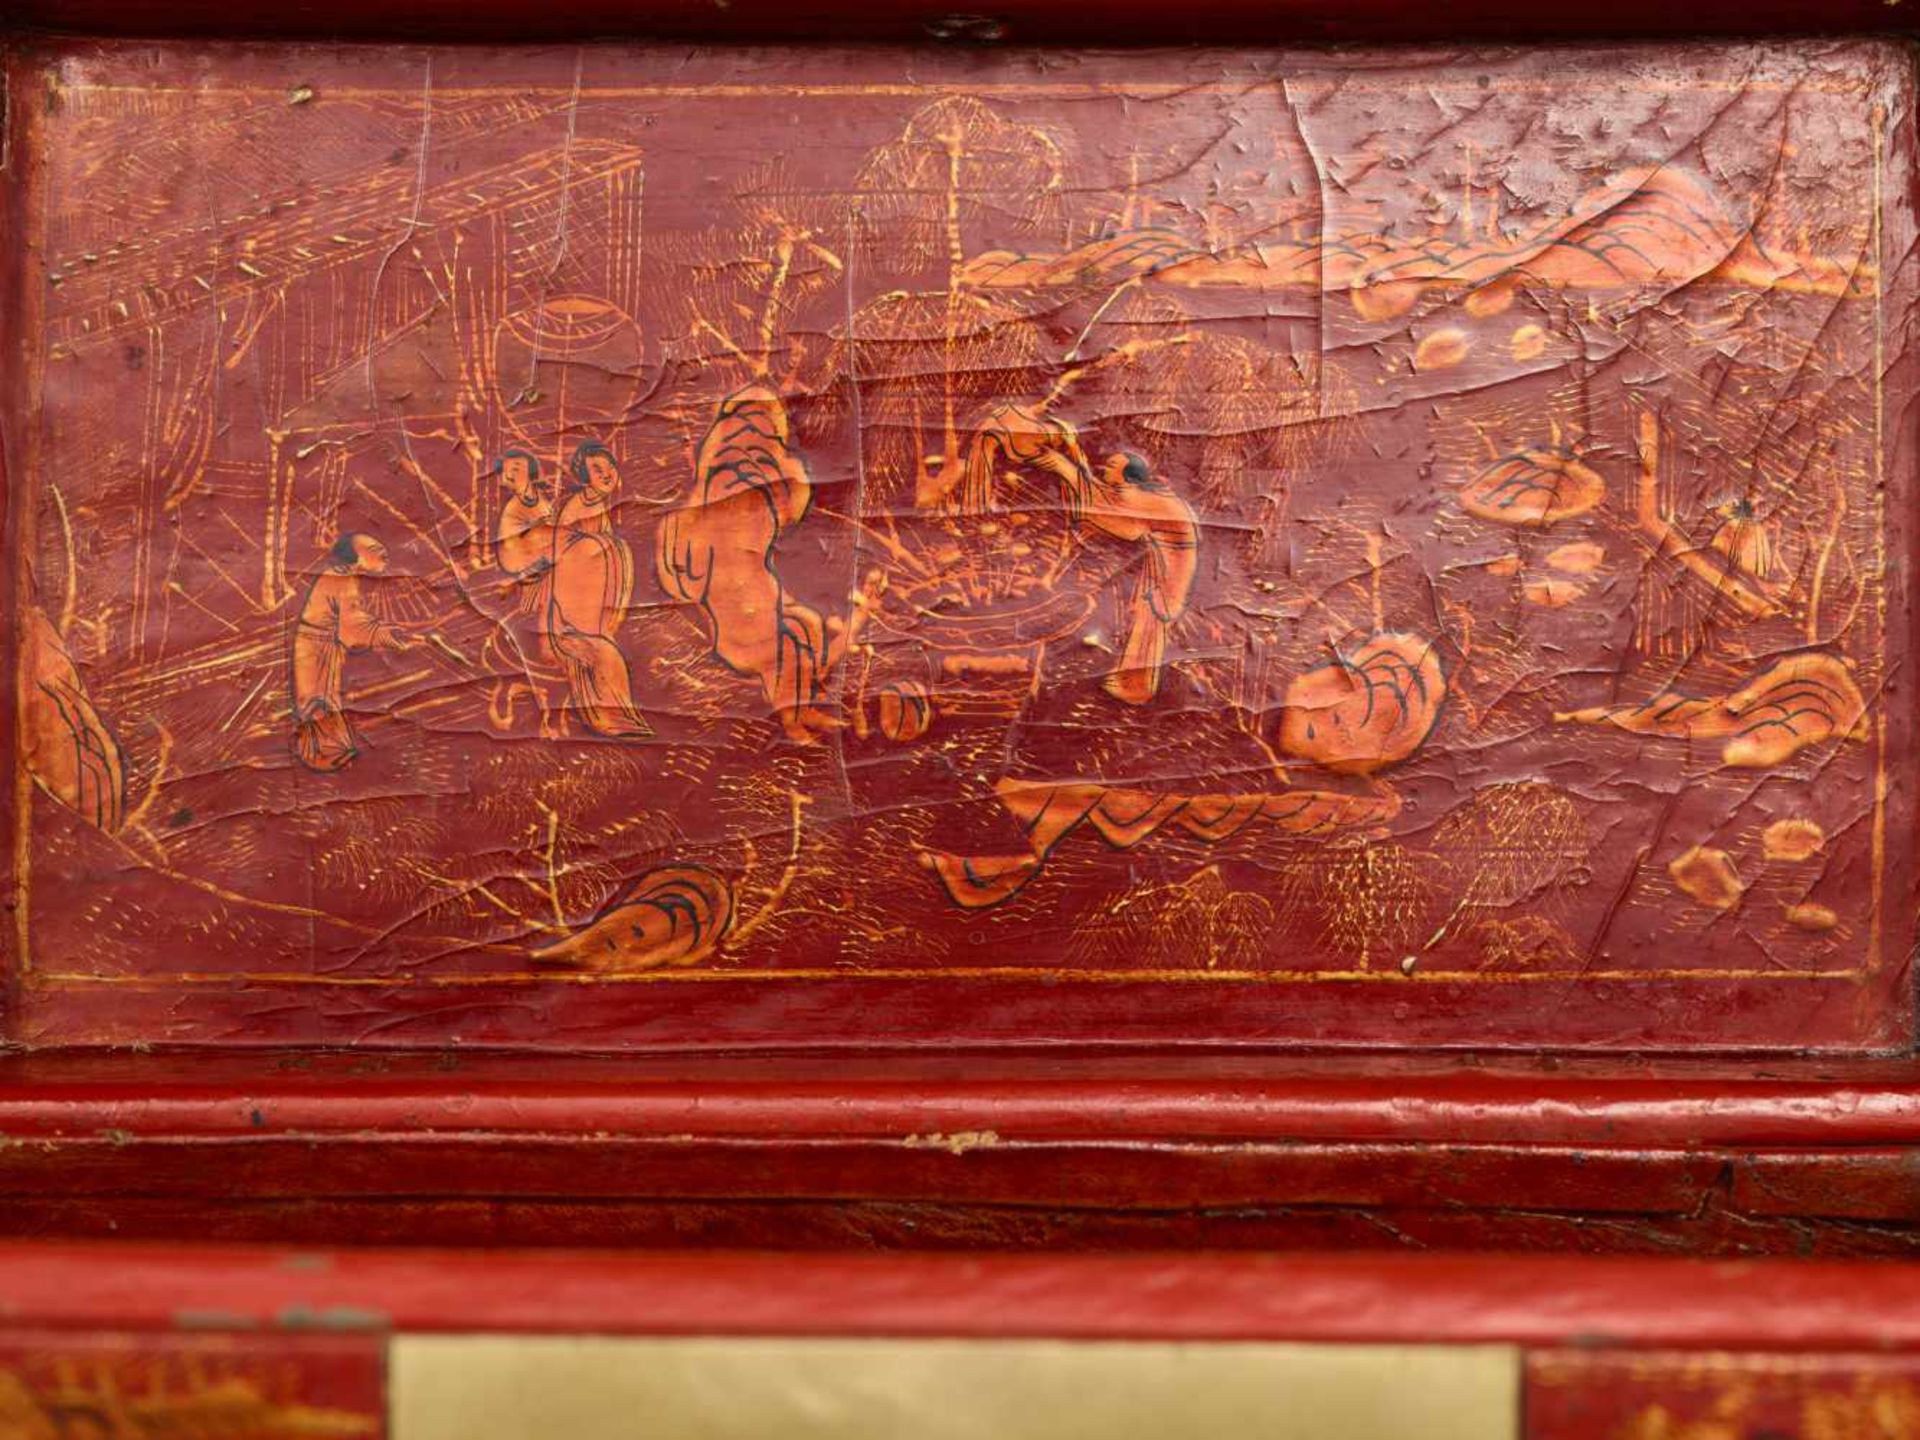 A BRASS FITTED PIG SKIN LACQUER BOX WITH VILLAGE SCENES, QING DYNASTY Pig skin on wooden body, - Image 11 of 11